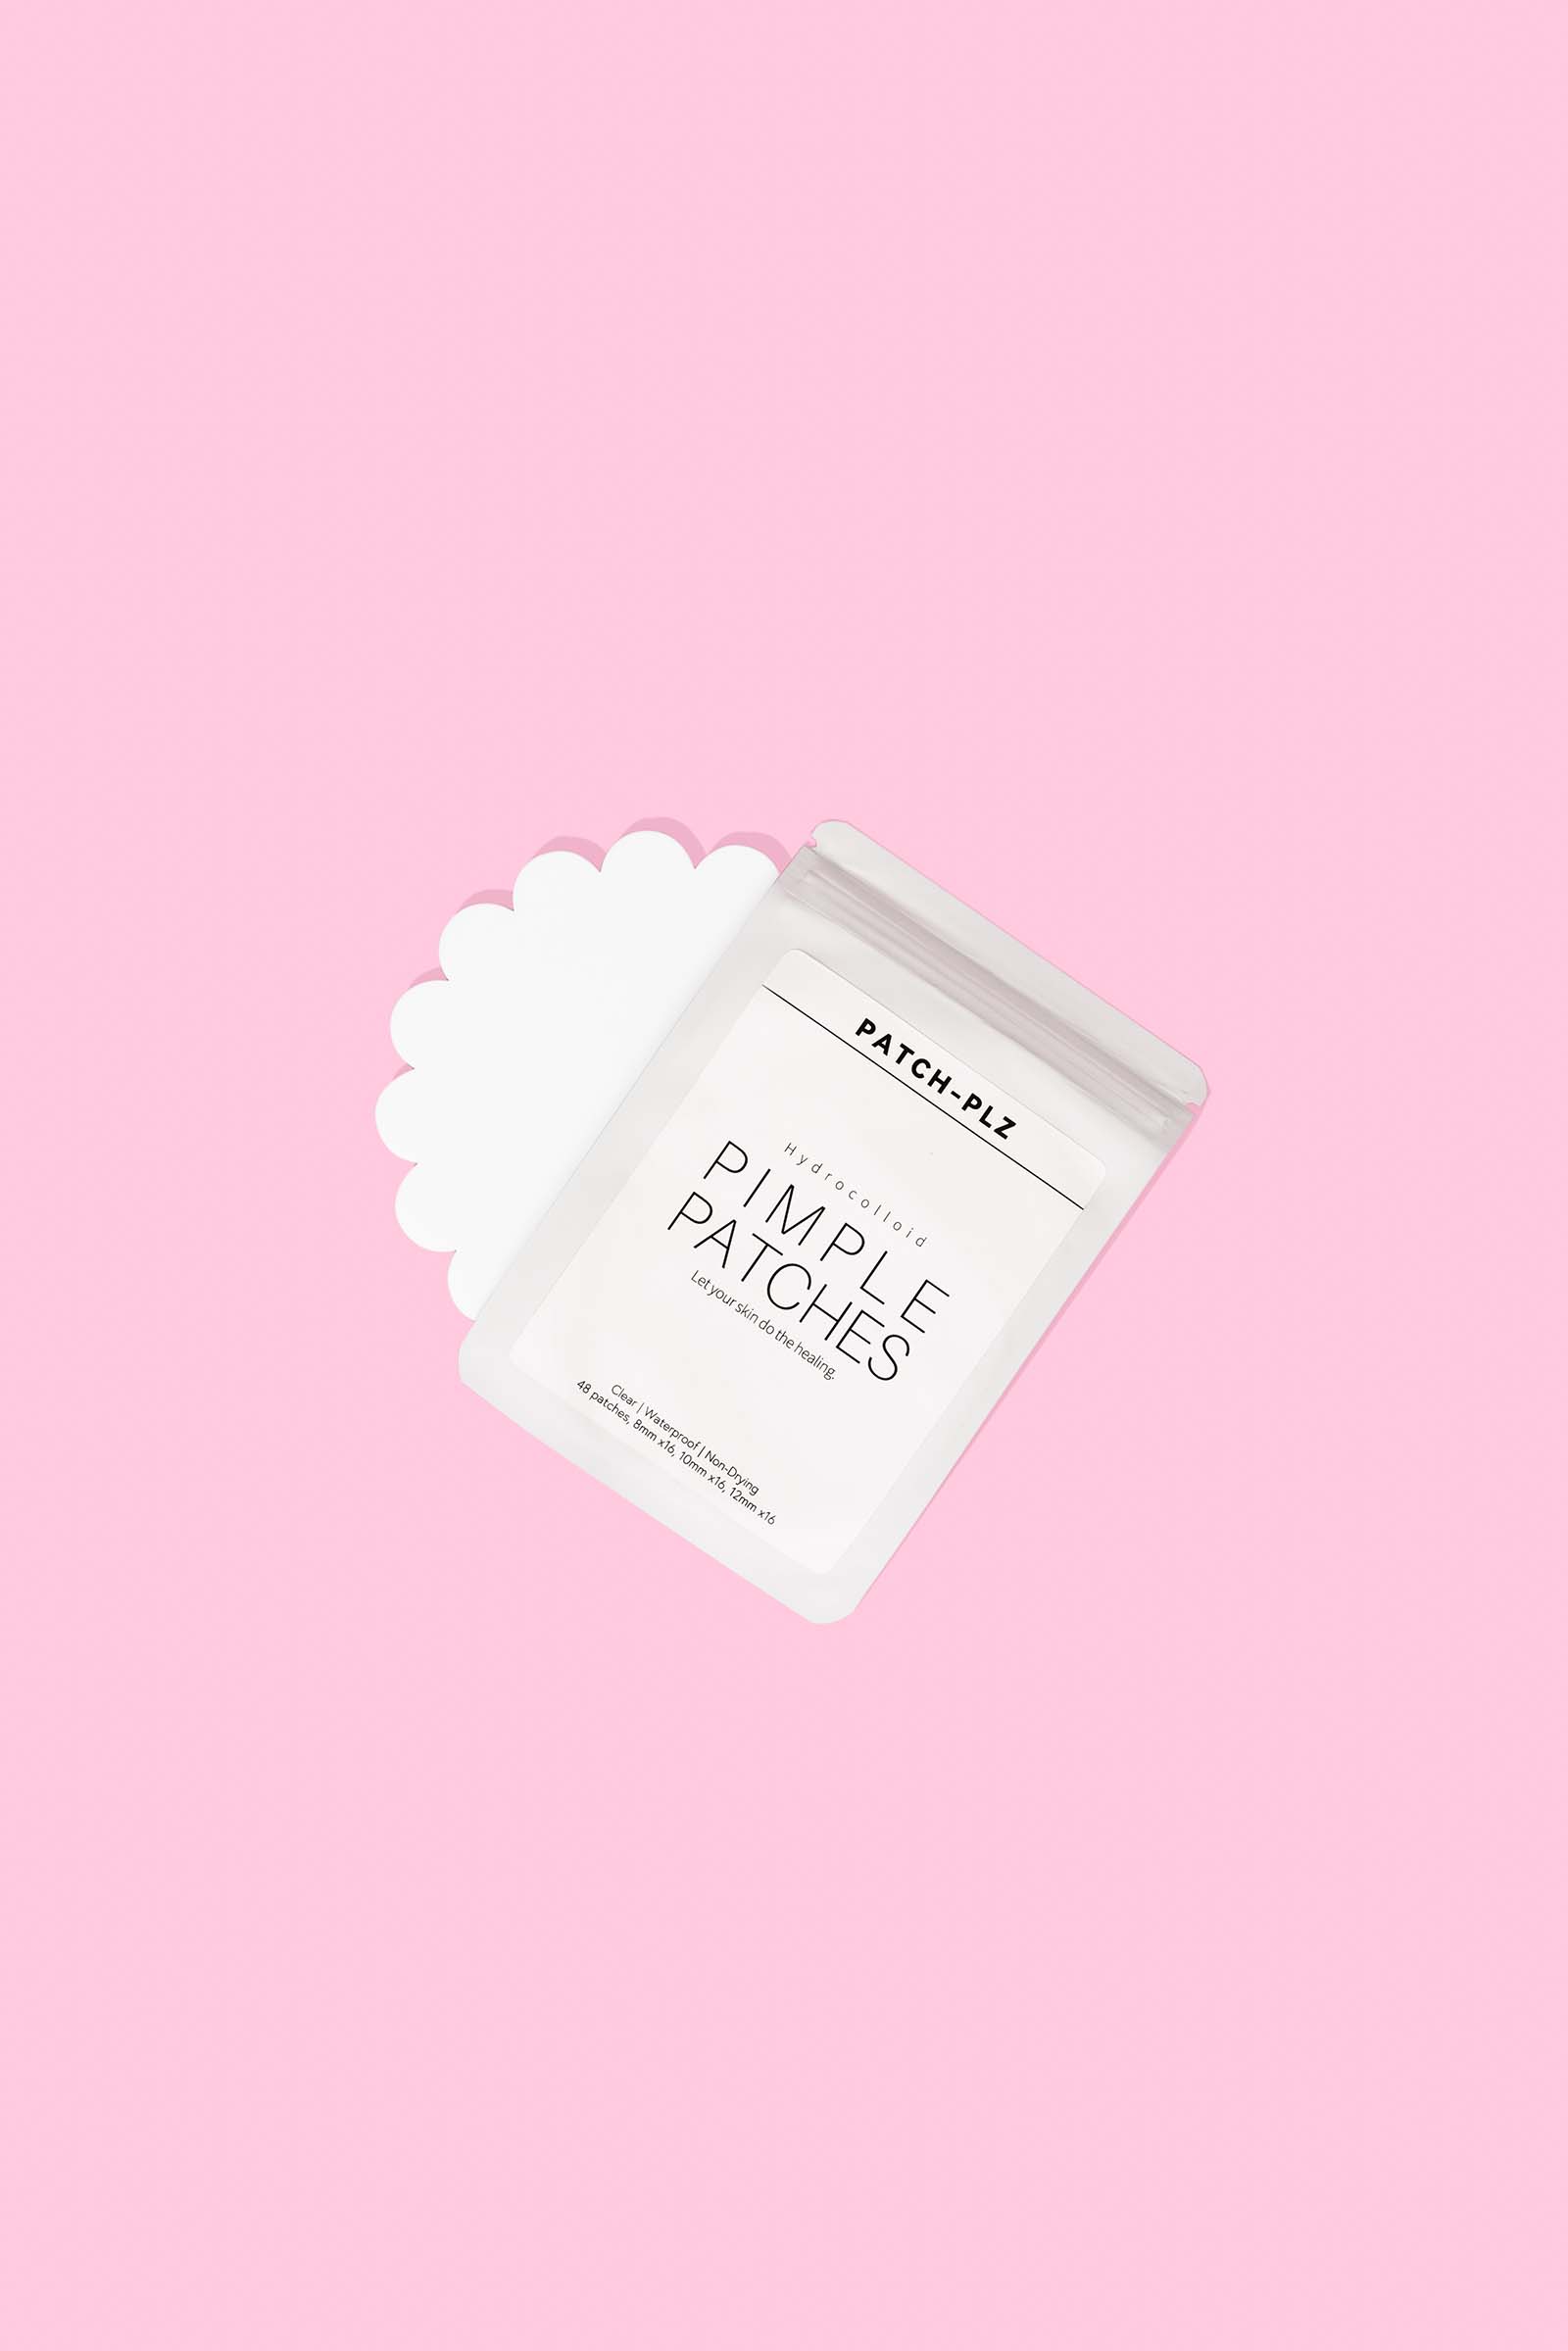 Pink product photography by Colourop Studio showcases Patch Plz's pimple-fighting patches